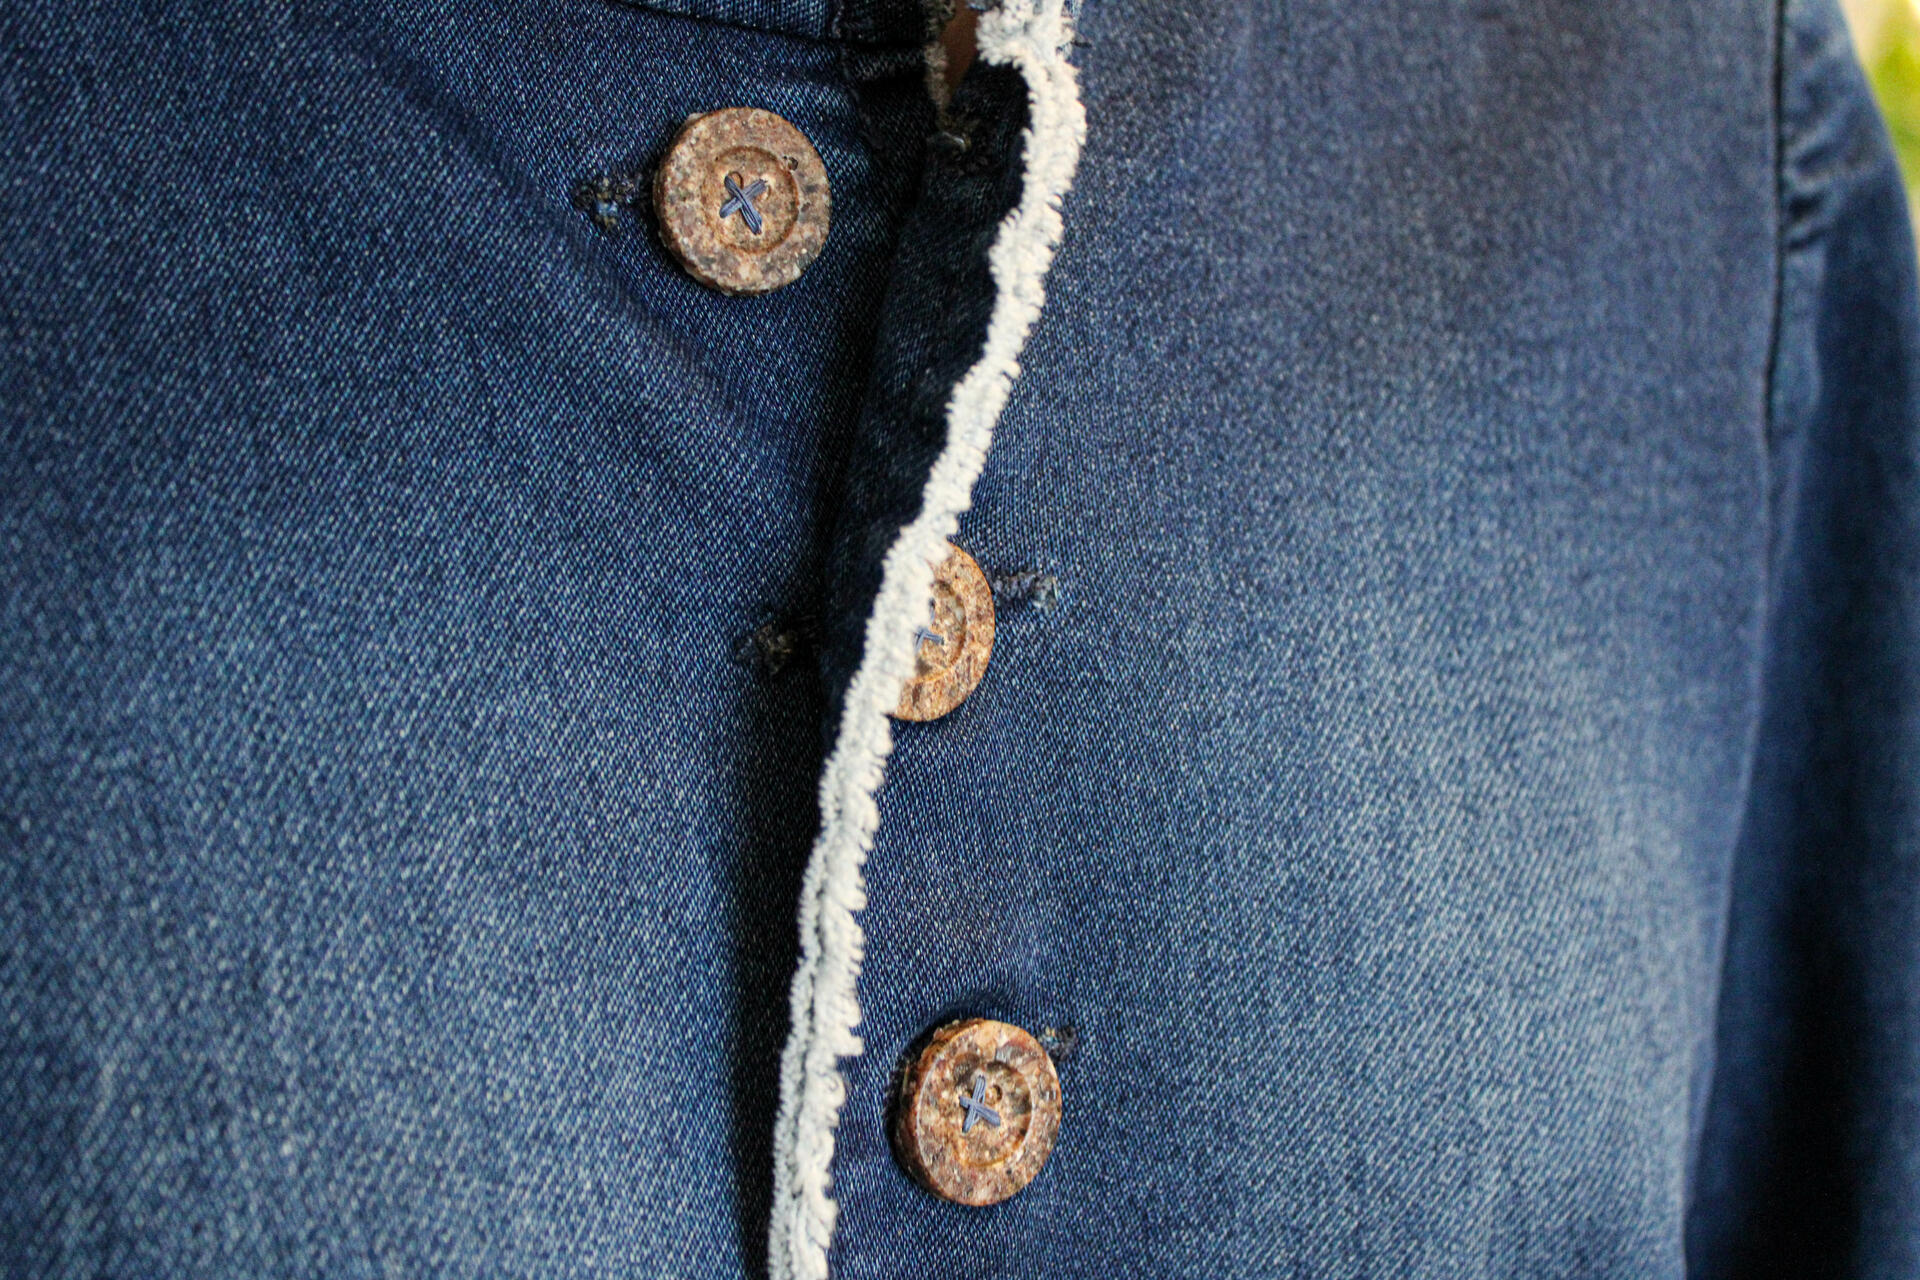 A close-up shot of three buttons made of periwinkle shells ground up and casted back together into the shape of a traditional button. They are stitched with blue thread onto a denim jacket.